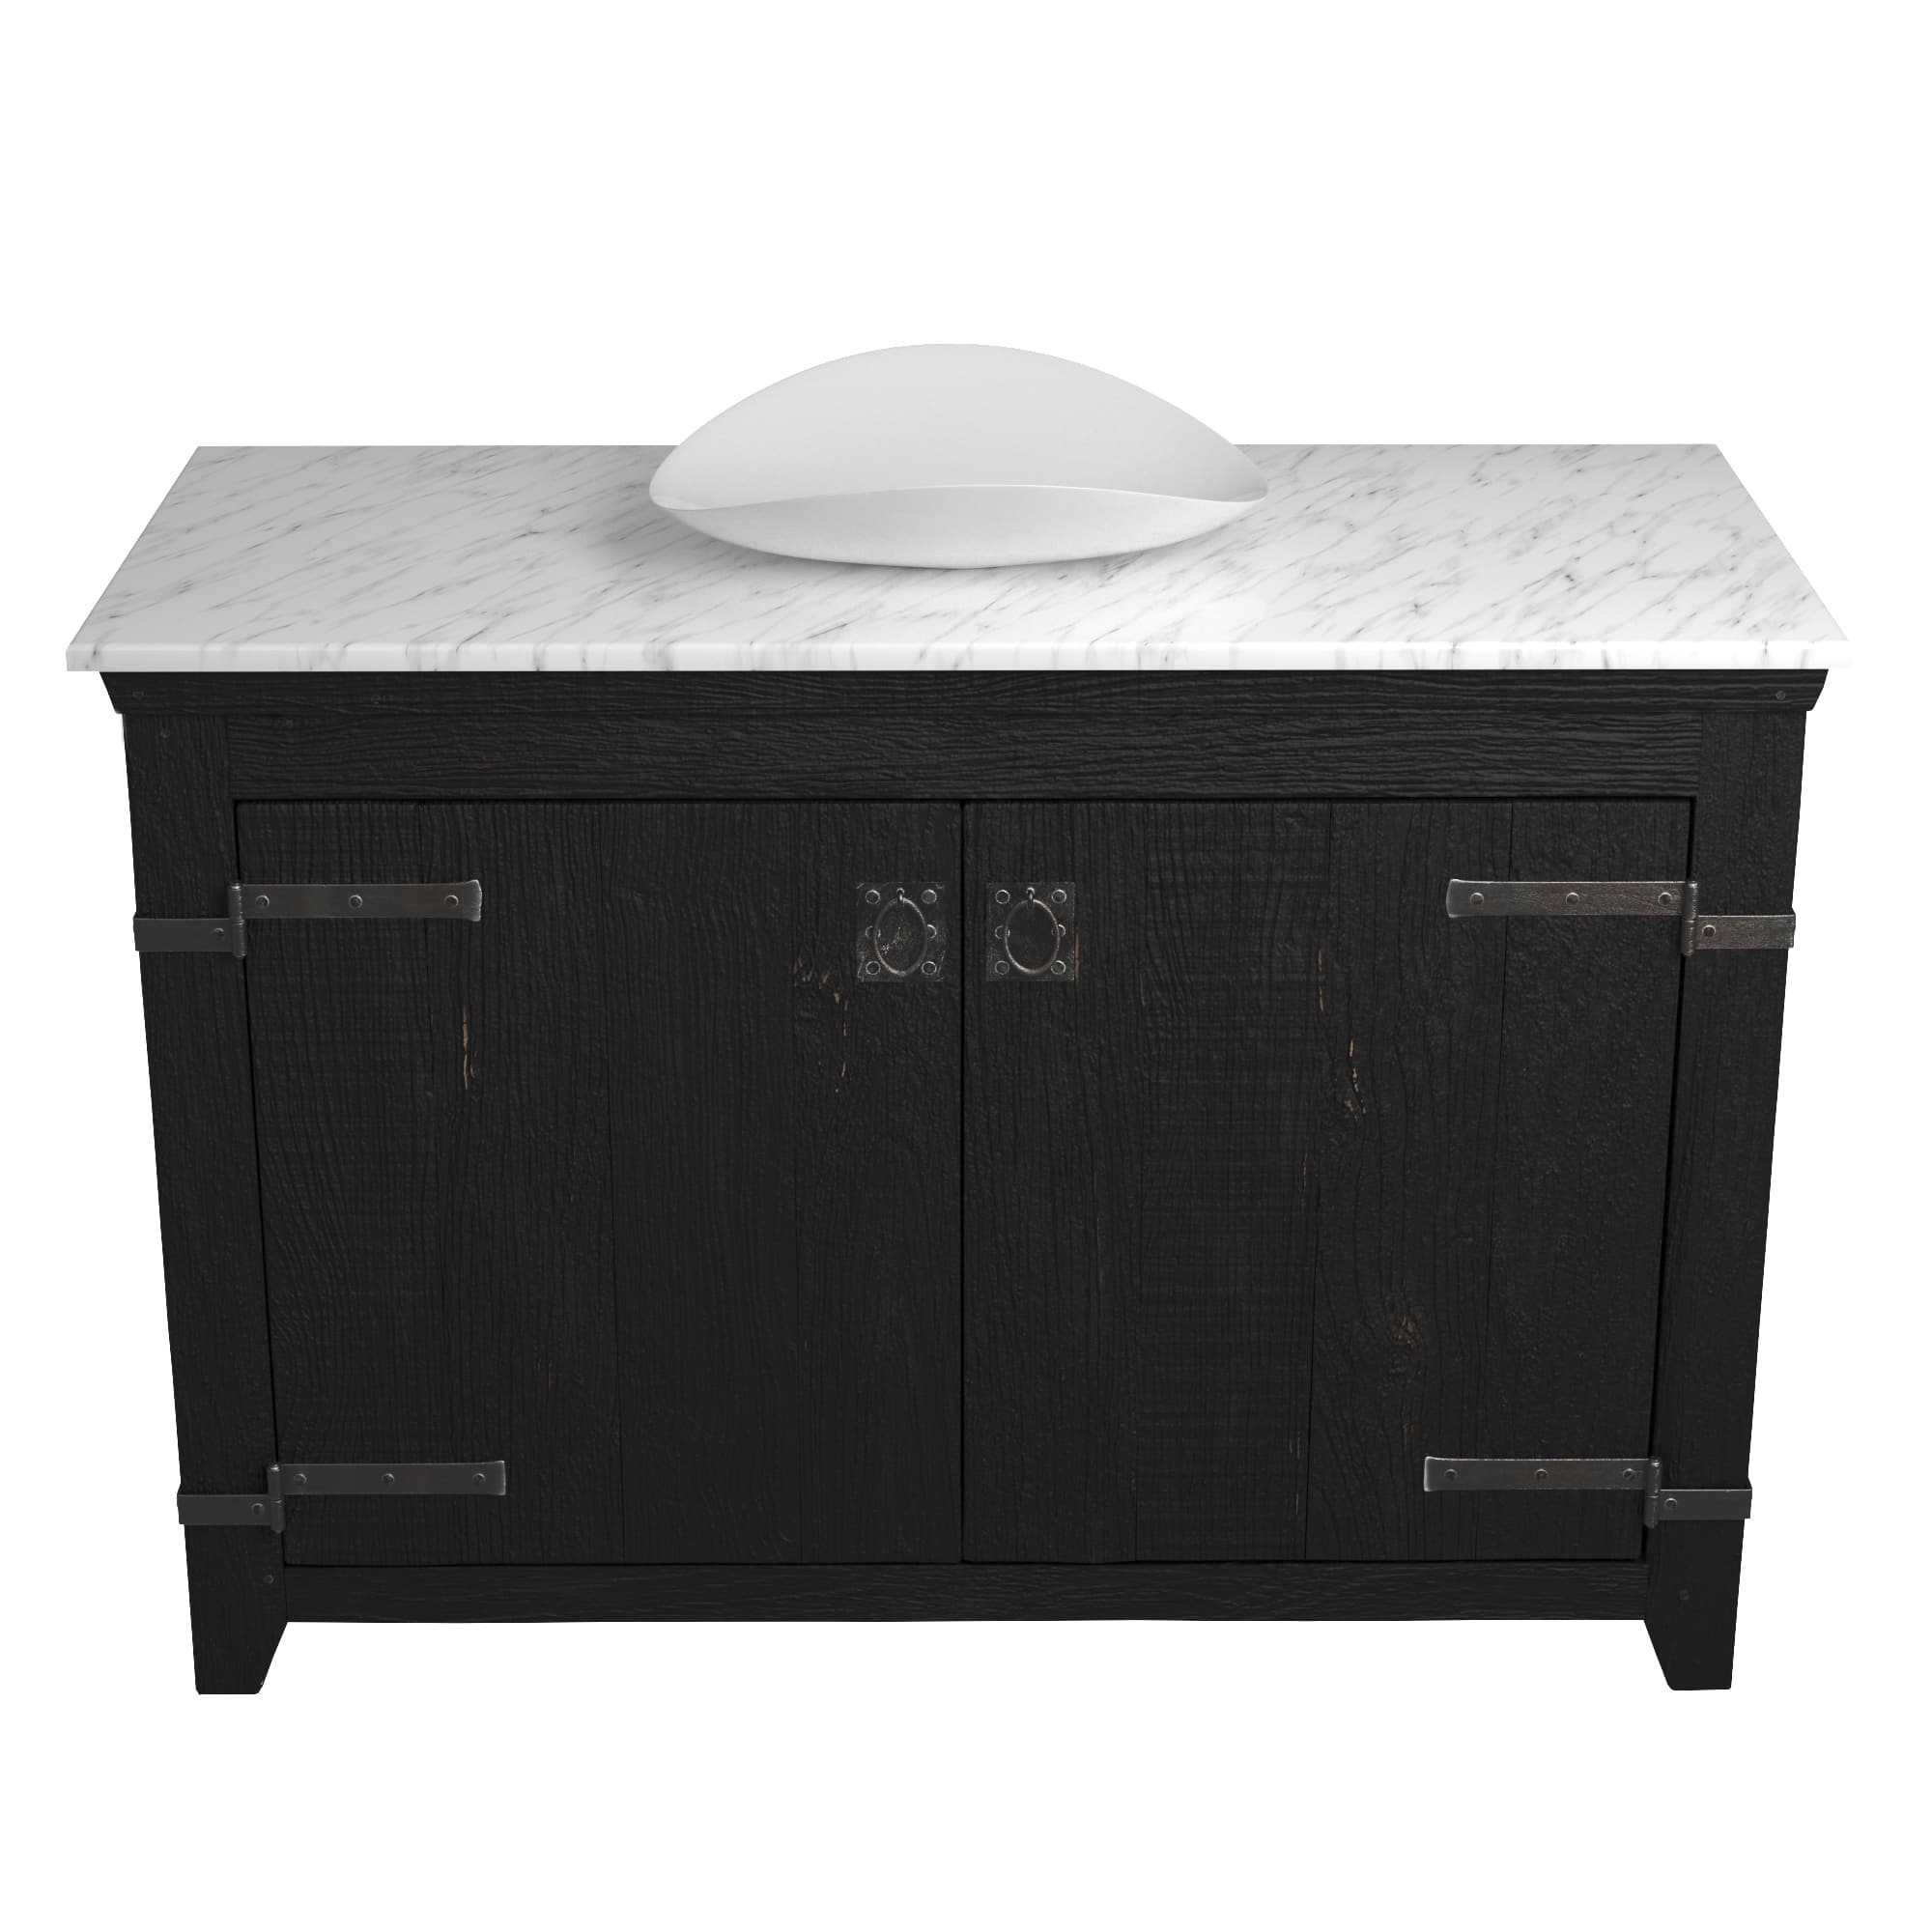 Native Trails 48" Americana Vanity in Anvil with Carrara Marble Top and Sorrento in Bianco, Single Faucet Hole, BND48-VB-CT-MG-101